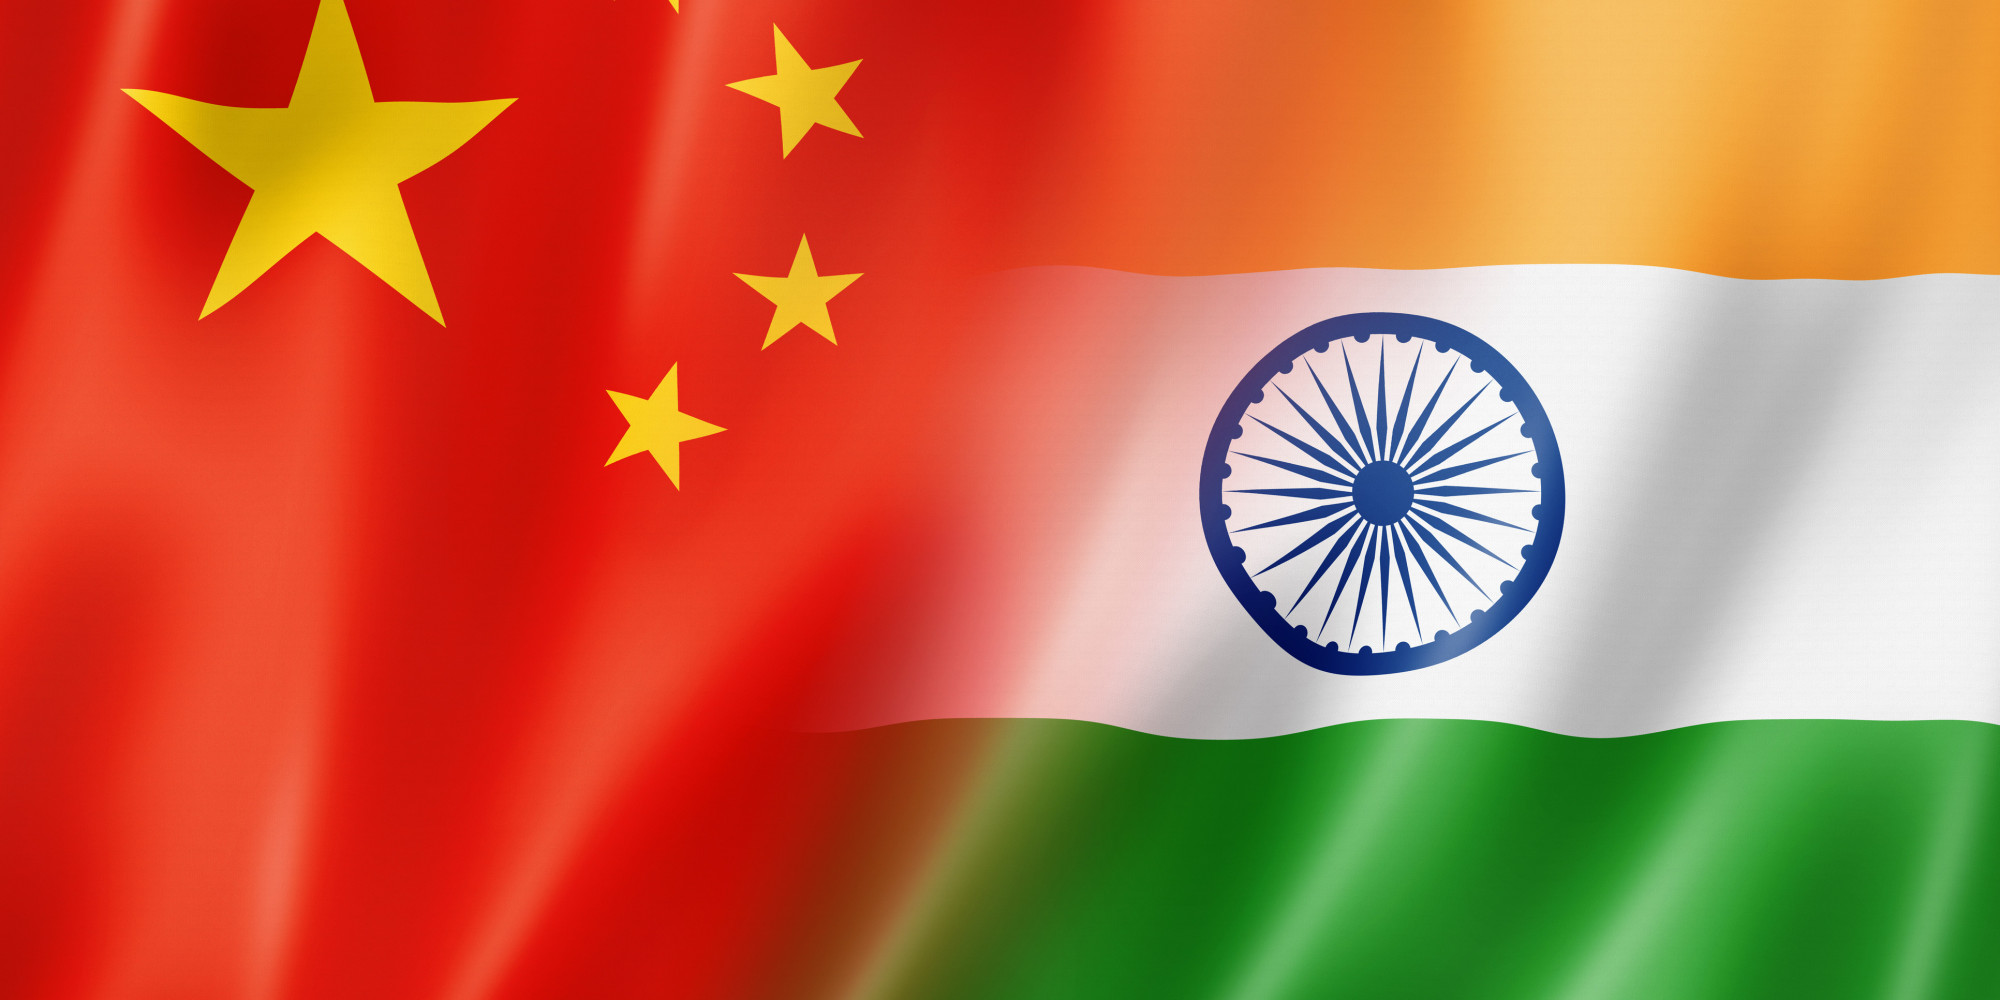 India and China Flags